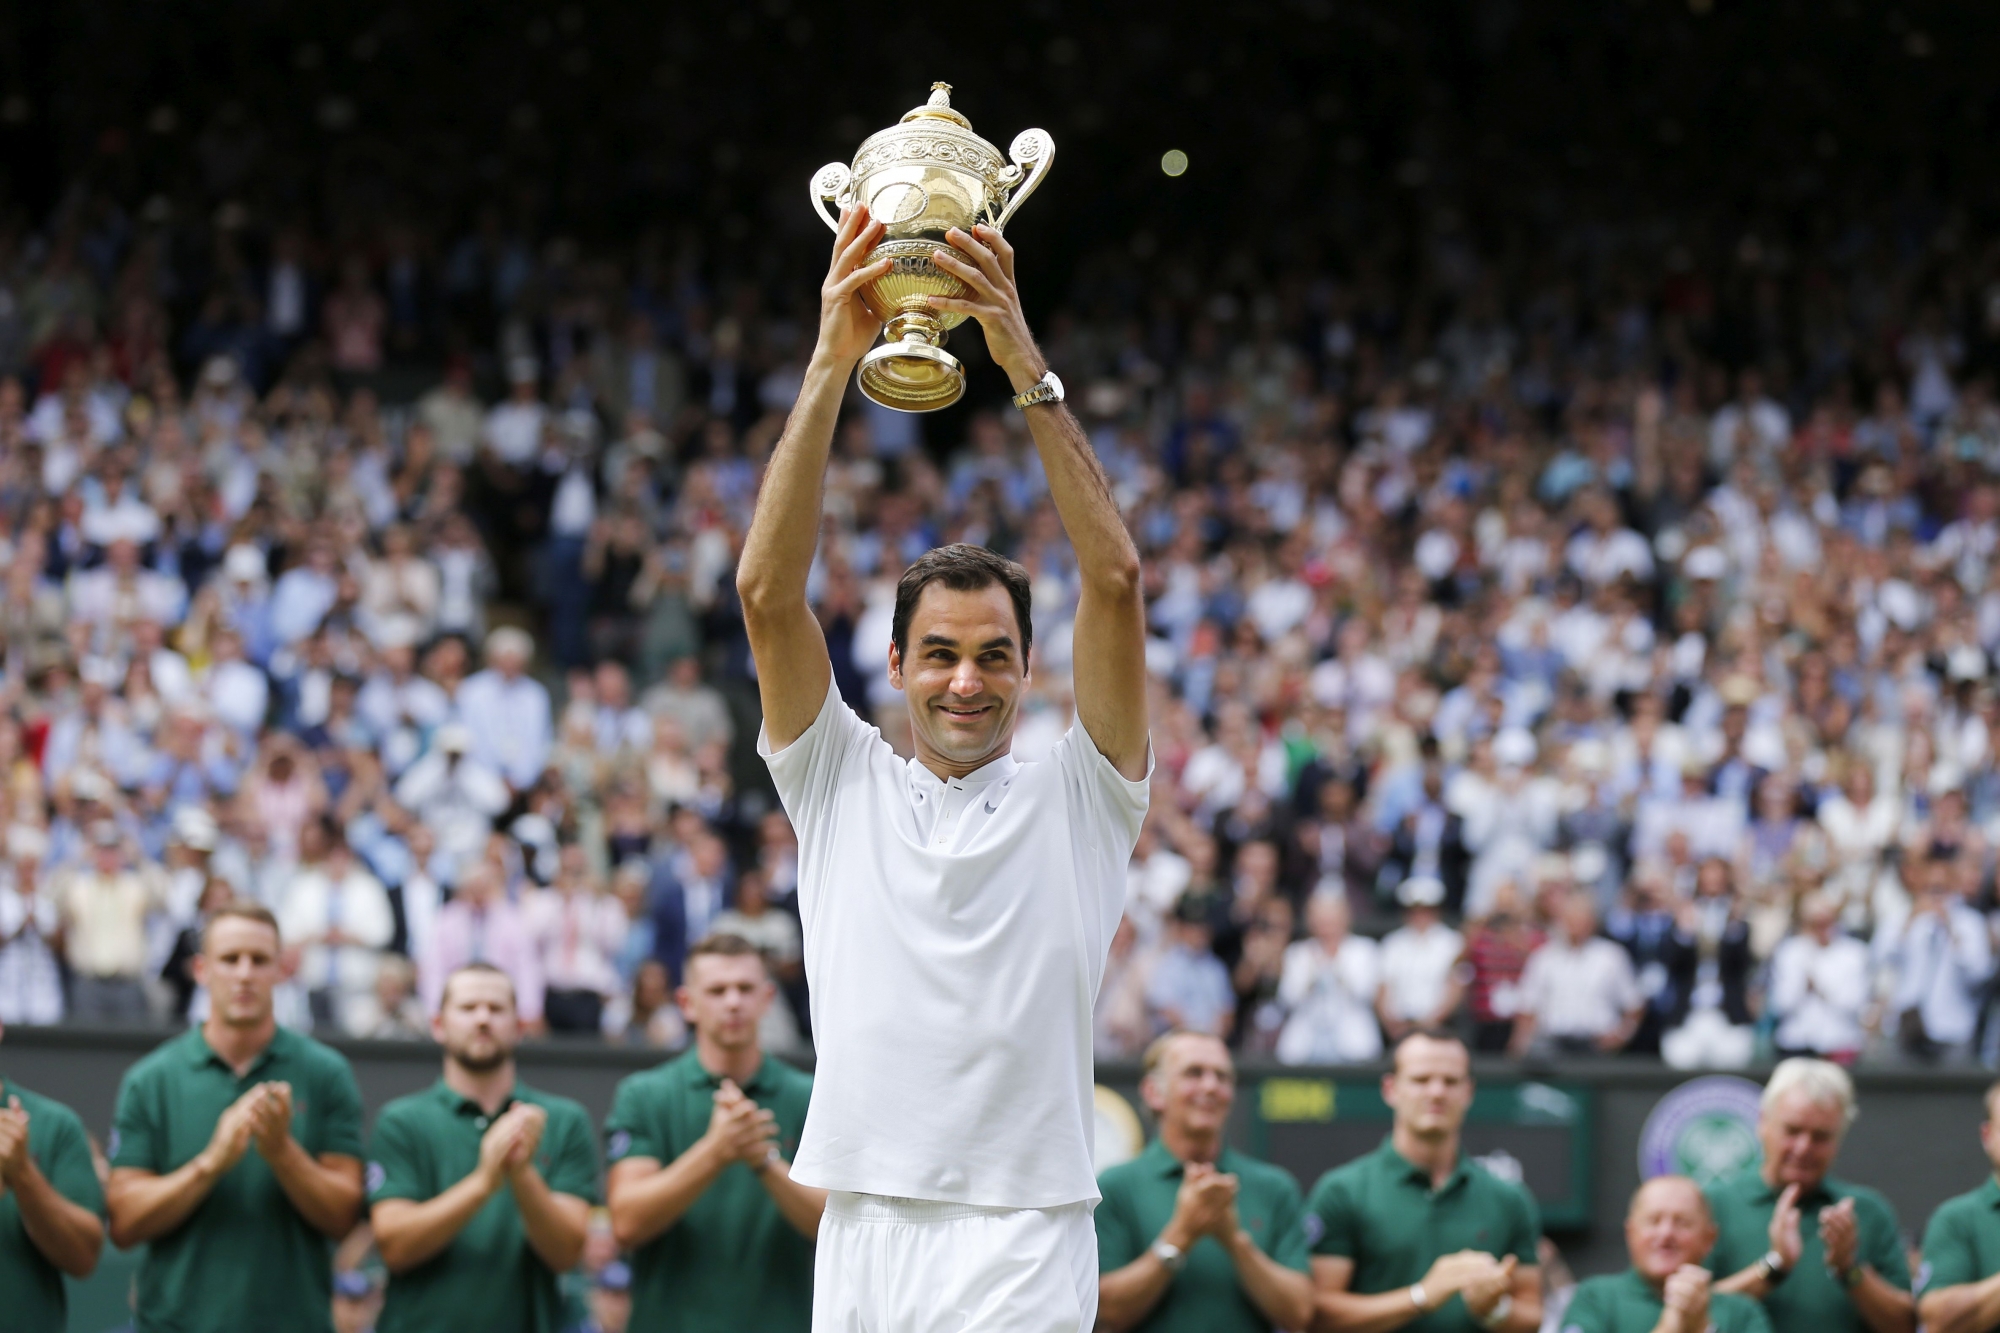 Roger Federer of Switzerland celebrates with the trophy after winning the men's final match against Marin Cilic of Croatia during the Wimbledon Championships at the All England Lawn Tennis Club, in London, Britain, 16 July 2017. (KEYSTONE/Peter Klaunzer)